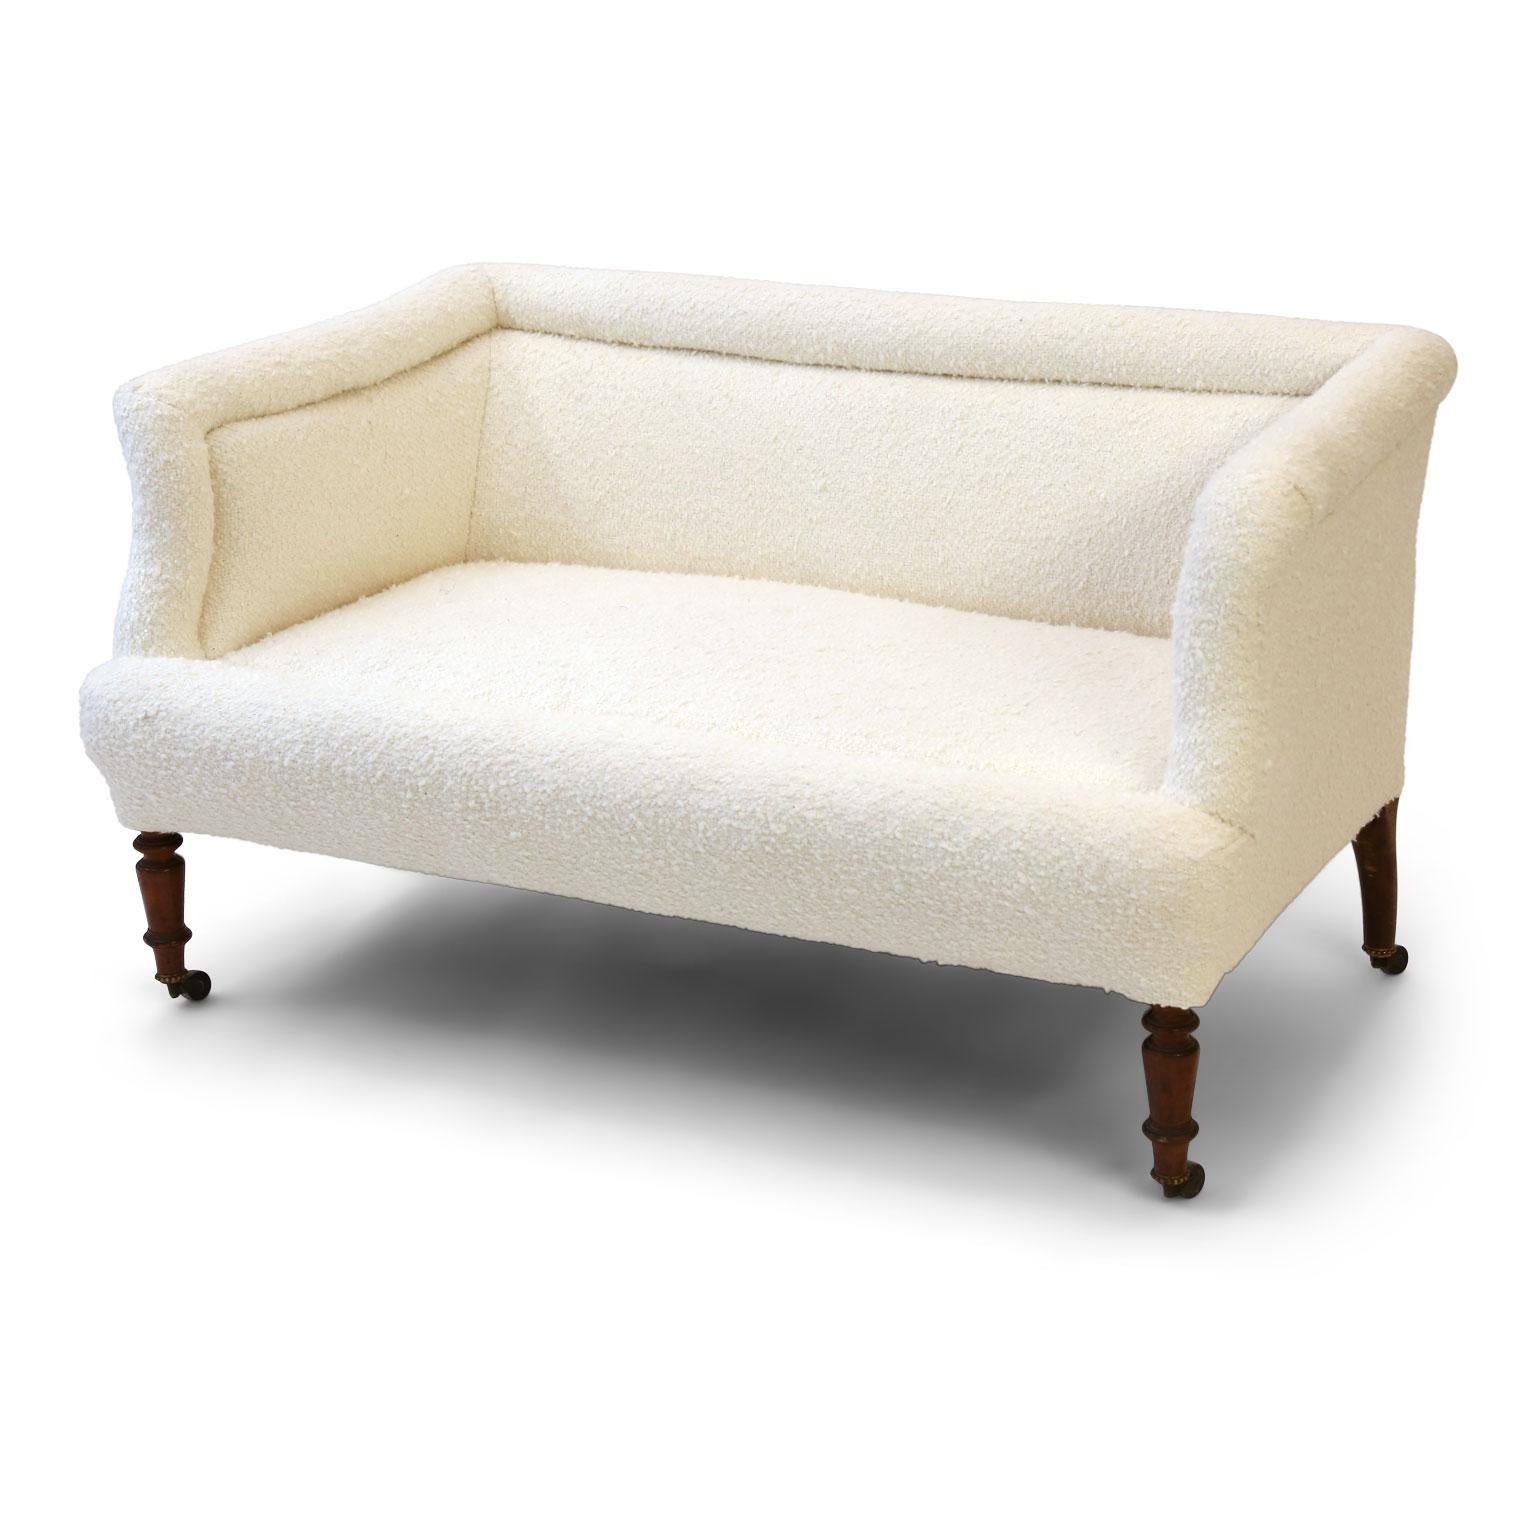 19th Century French Settee Upholstered in White Wool Bouclé